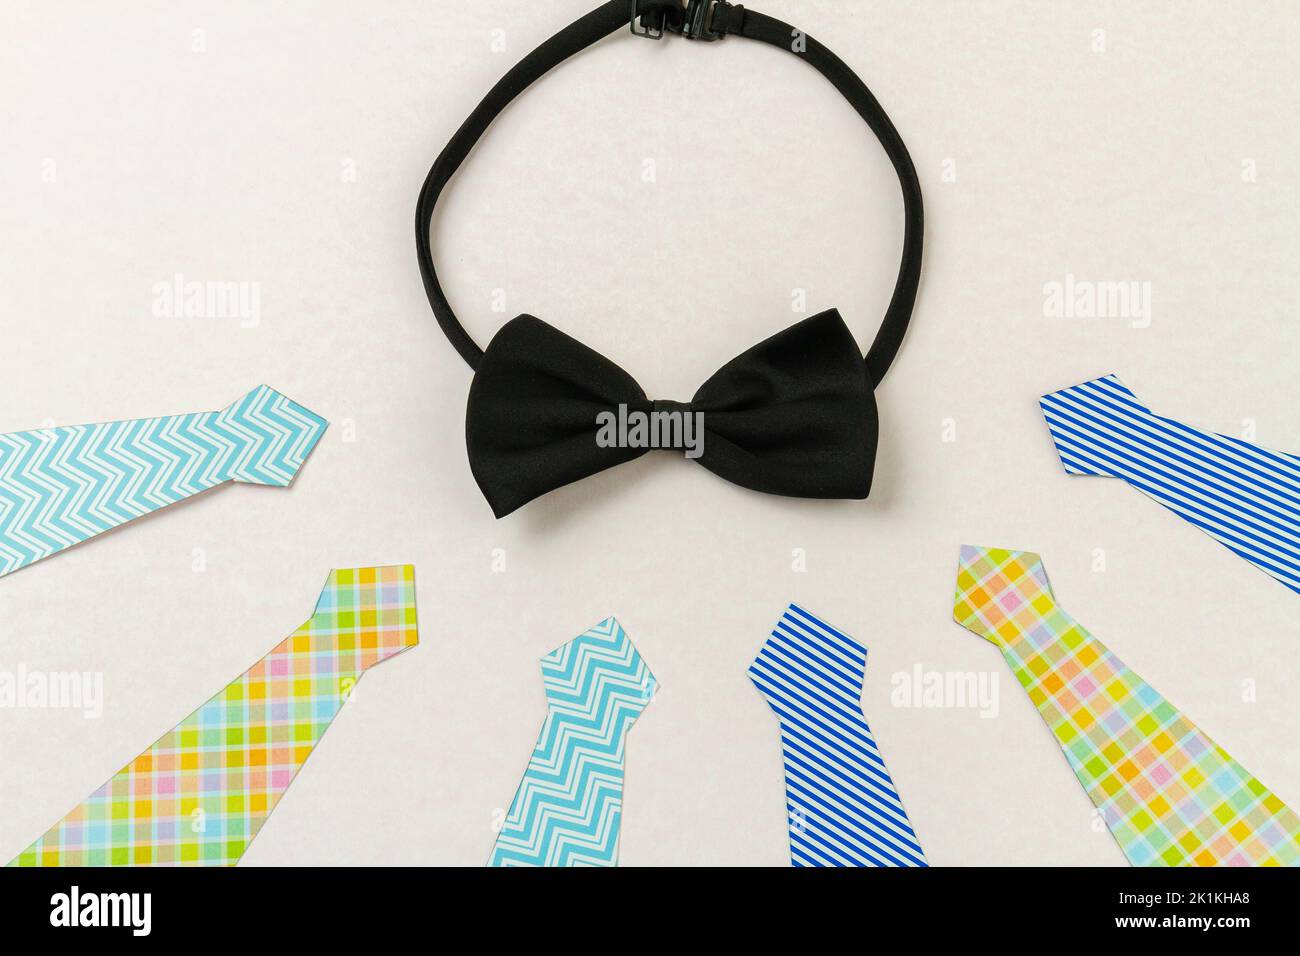 Black bow tie and neckties on white surface. Fathers day concept. Stock Photo